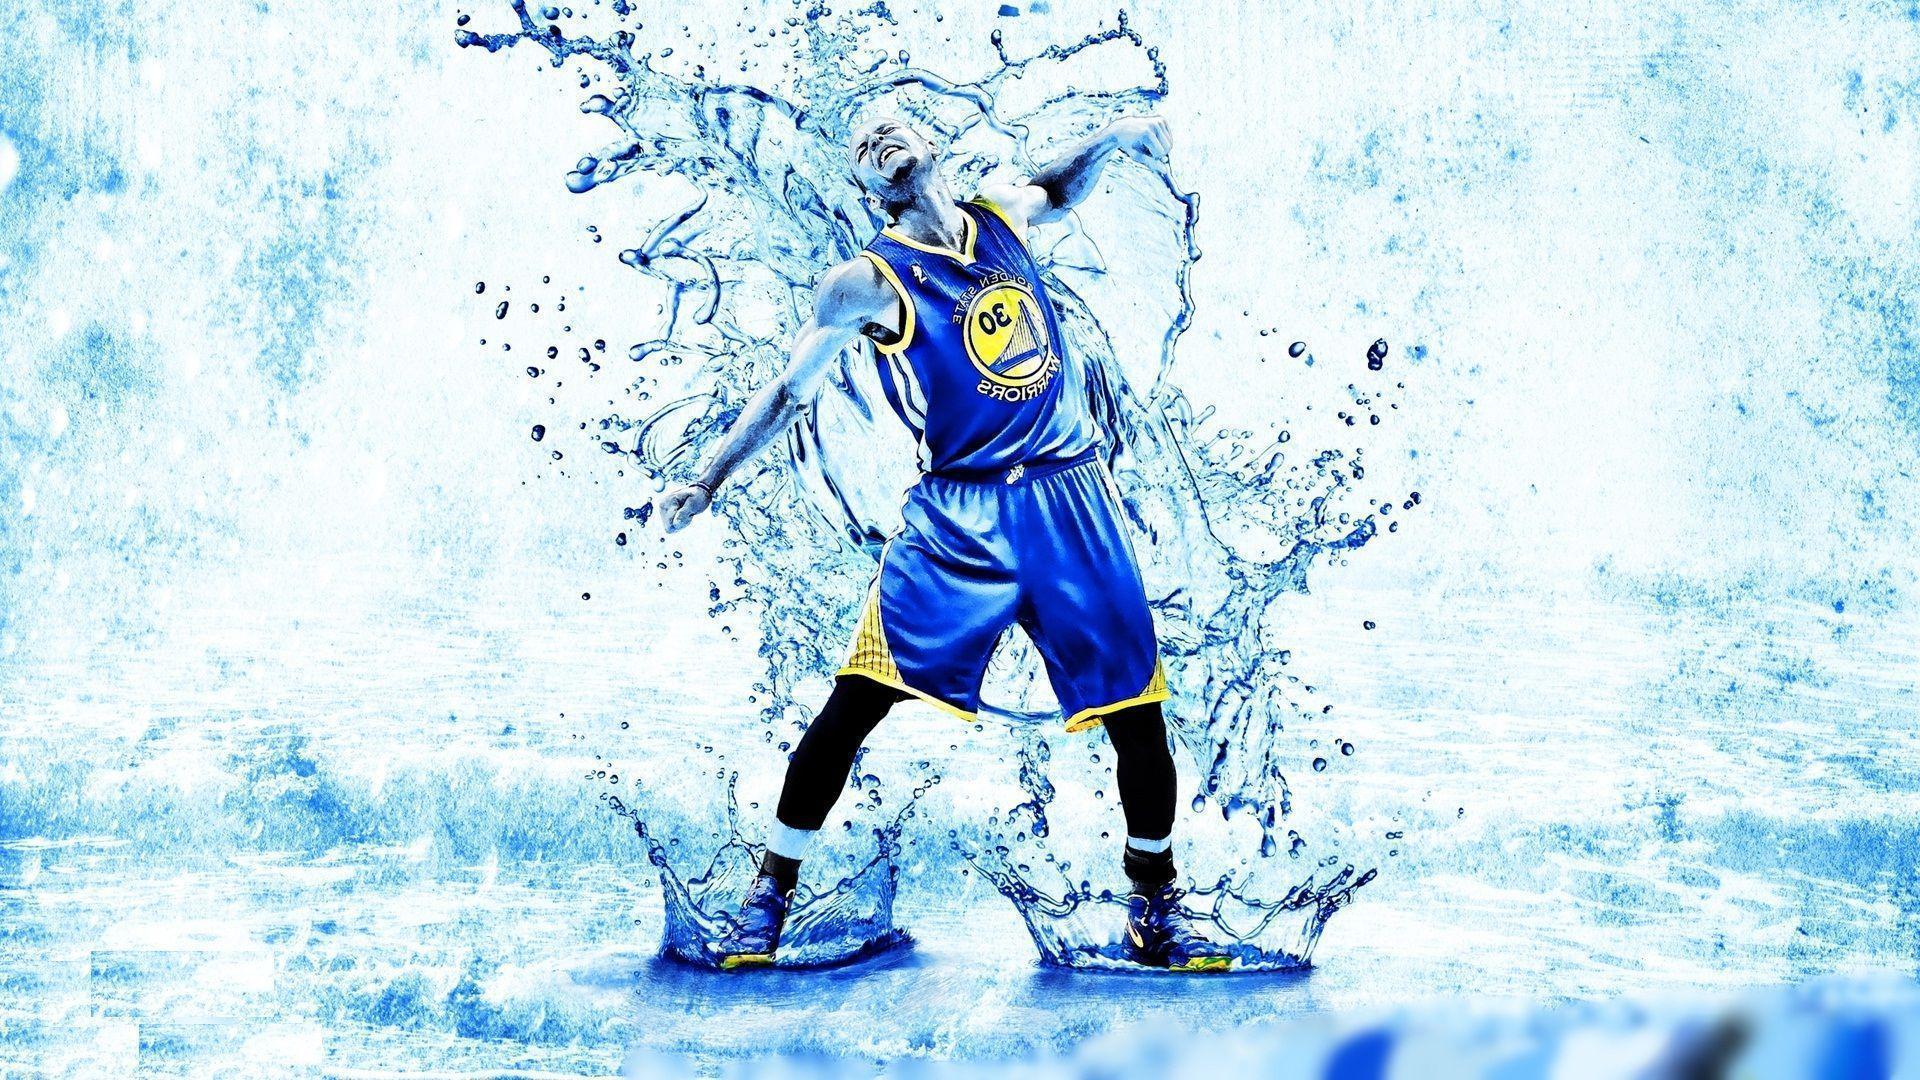 1920 x 1080 · jpeg - Stephen Curry Wallpapers - Wallpaper Cave